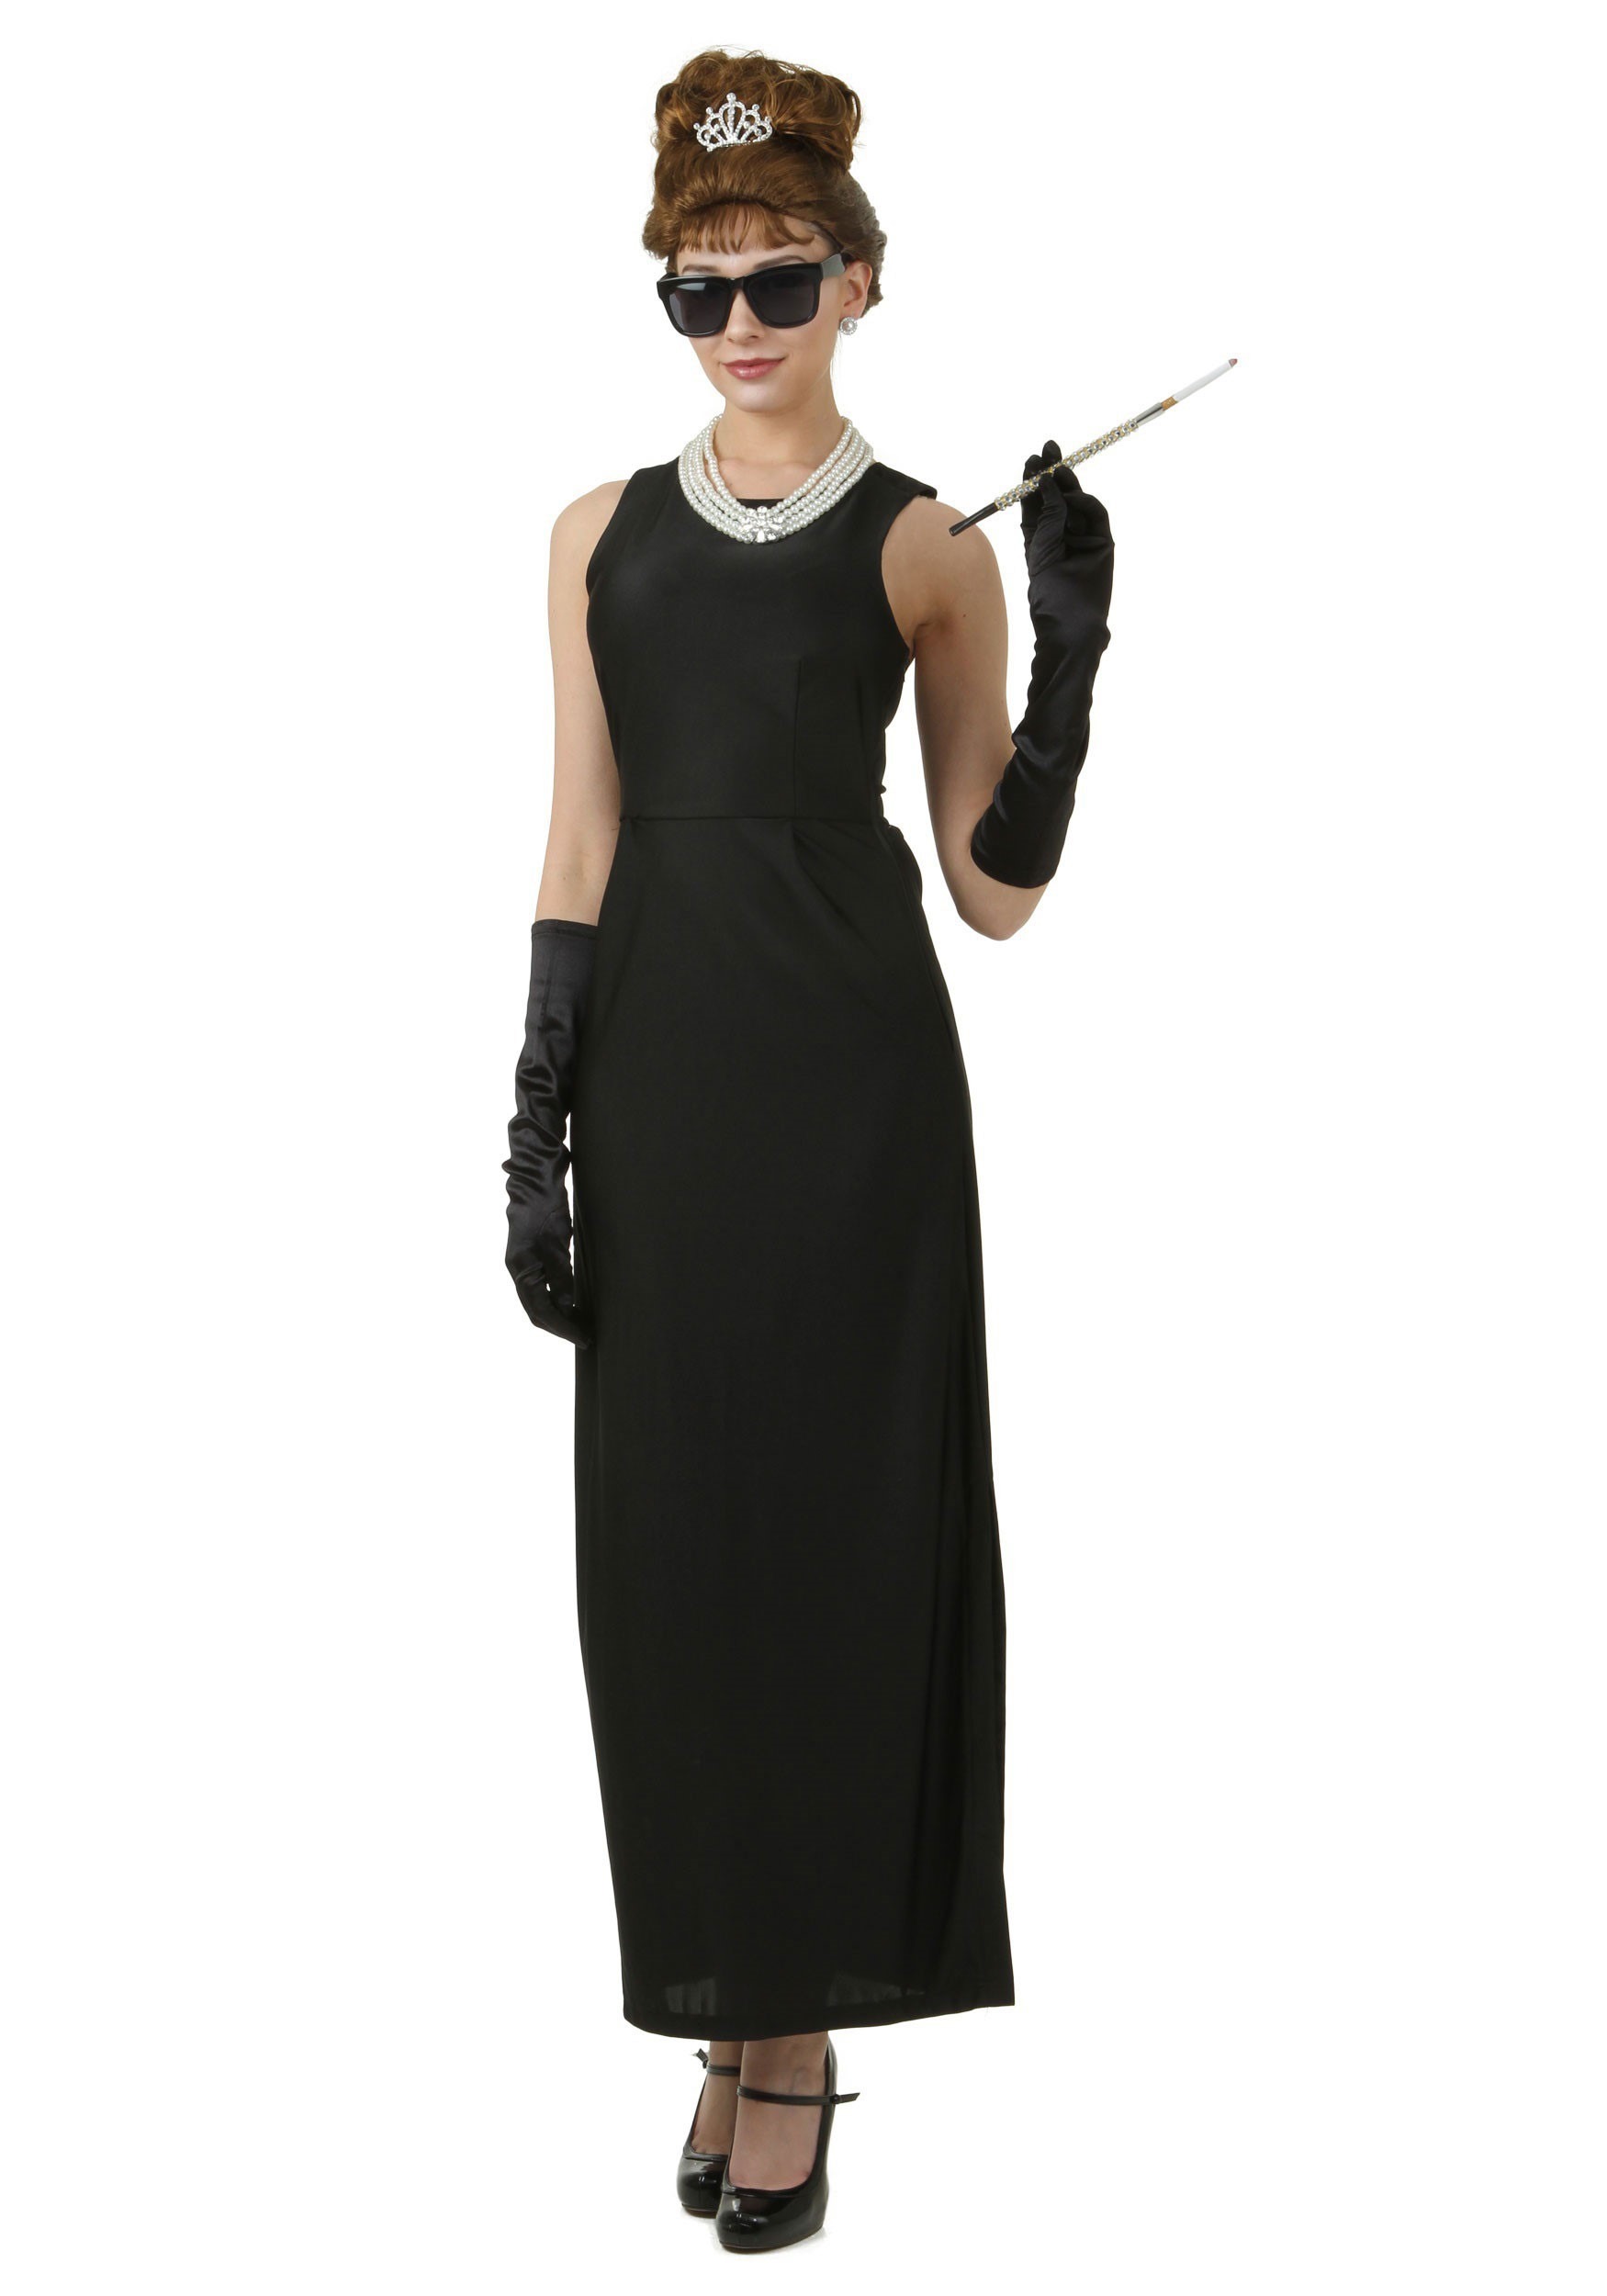 Breakfast at Tiffany's Holly Golightly Costume Plus Size